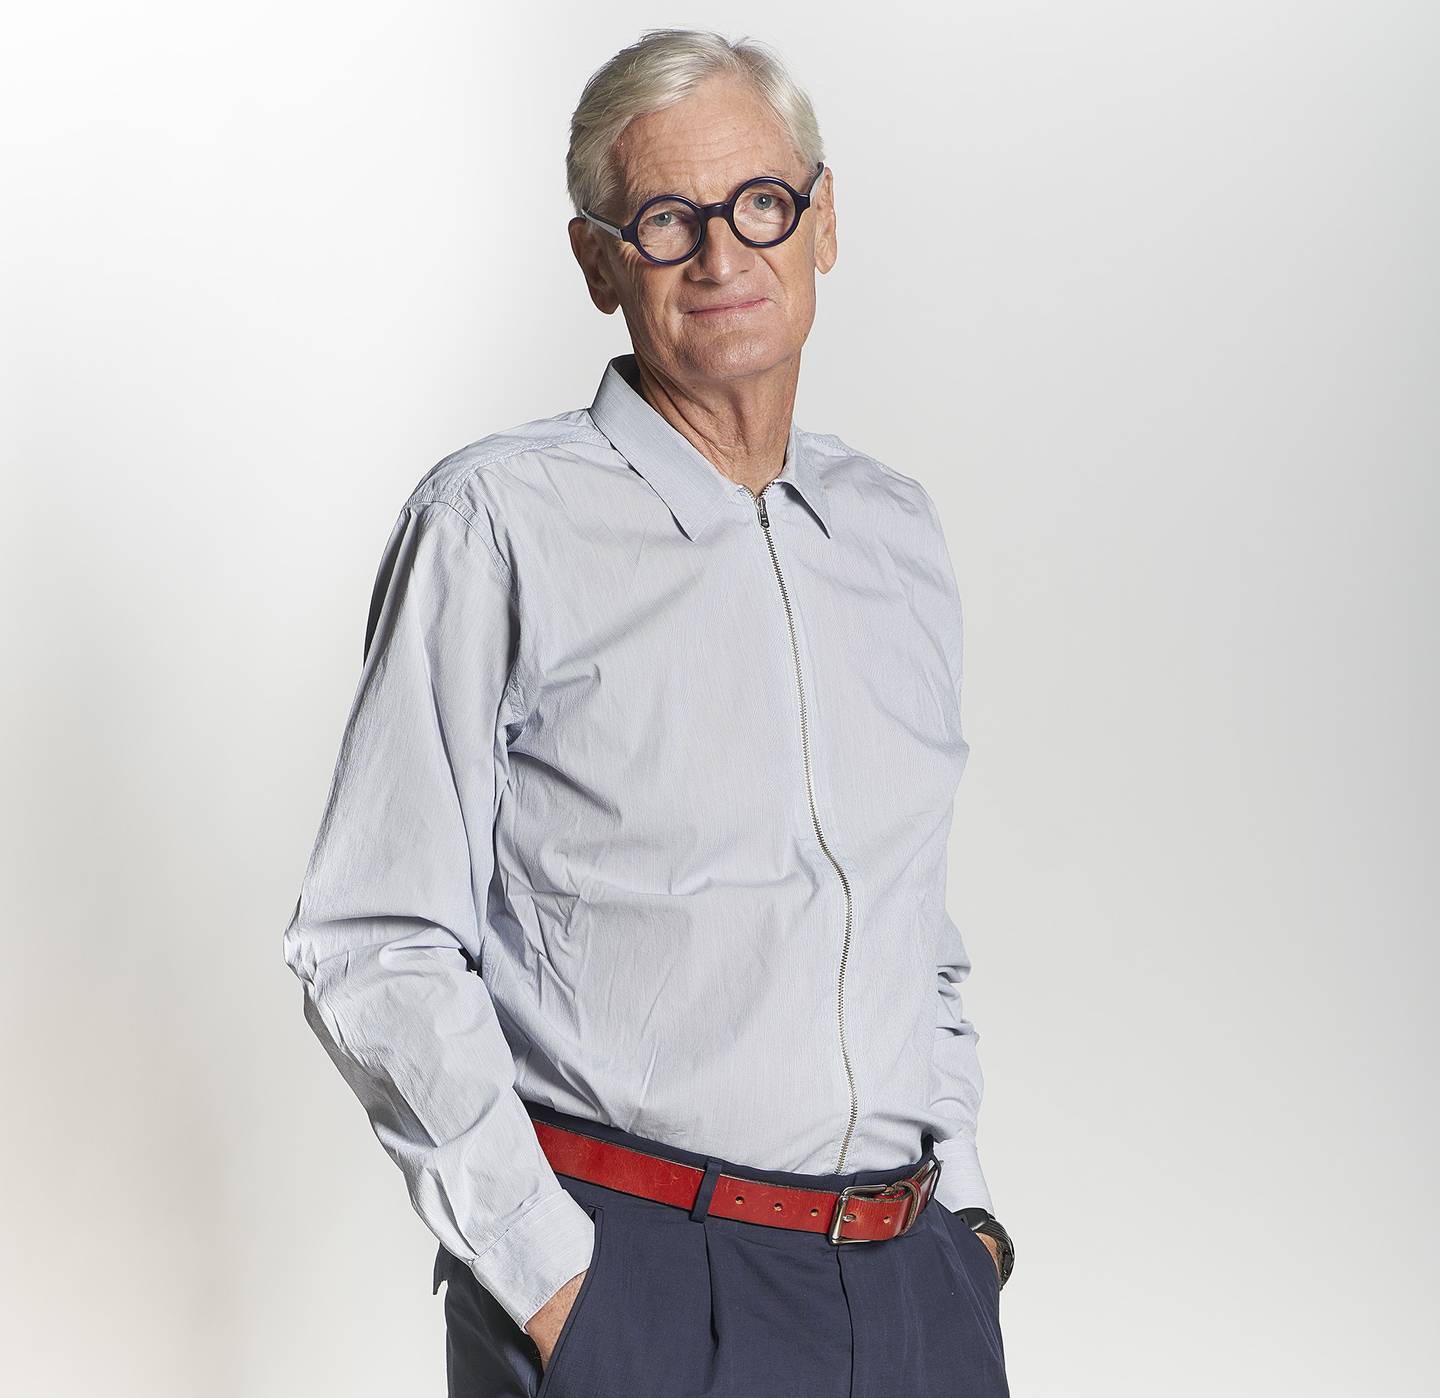 James Dyson inventor of the bagless double cyclone vacuum cleaner.